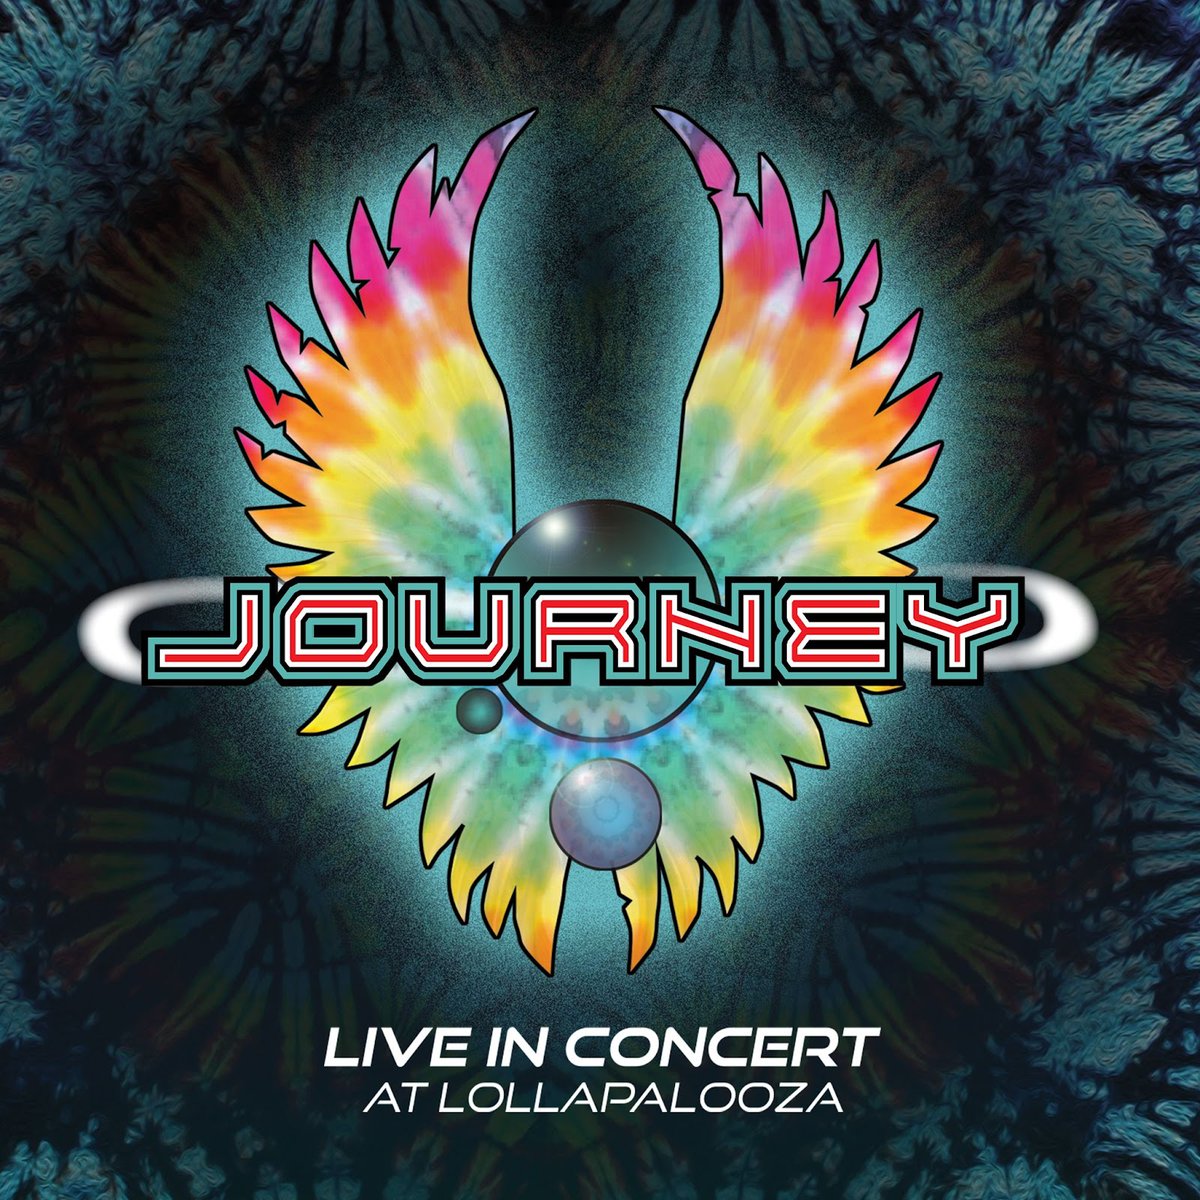 “Live in Concert at Lollapalooza” - now available on CD/DVD, Blu-ray, Vinyl, and Streaming! Relive Journey’s incredible performance from 2021 in Chicago, IL at @lollapalooza. Click the link to order and stream now: orcd.co/journeylive